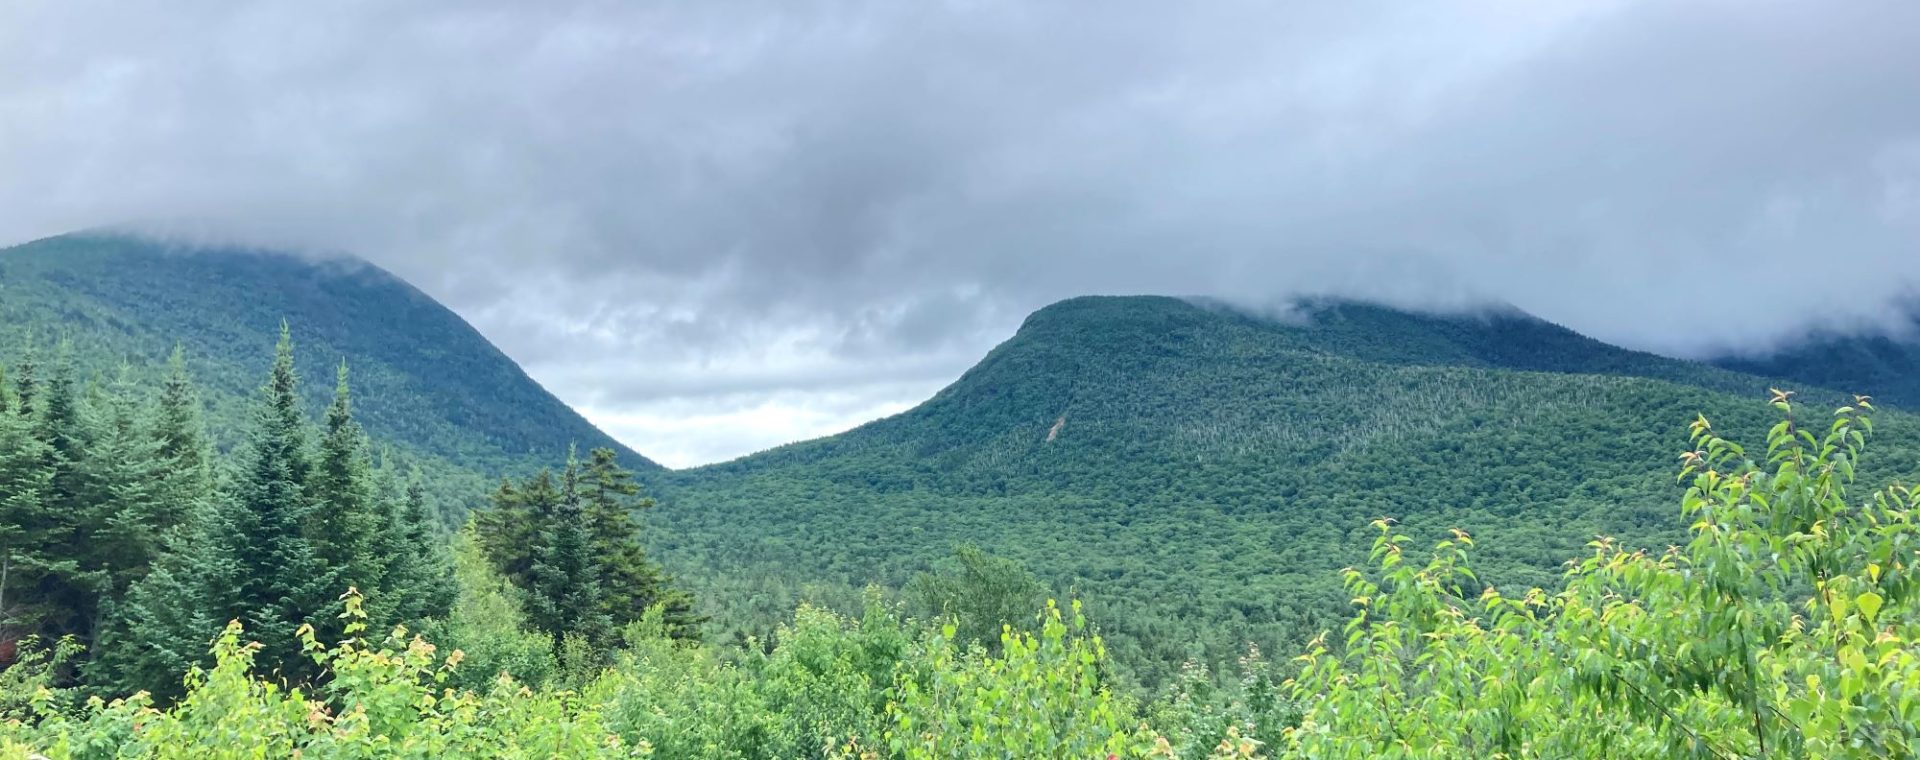 Beautiful view of White Mountains from Hancock Overlook along Kancamagus Highway in New Hampshire